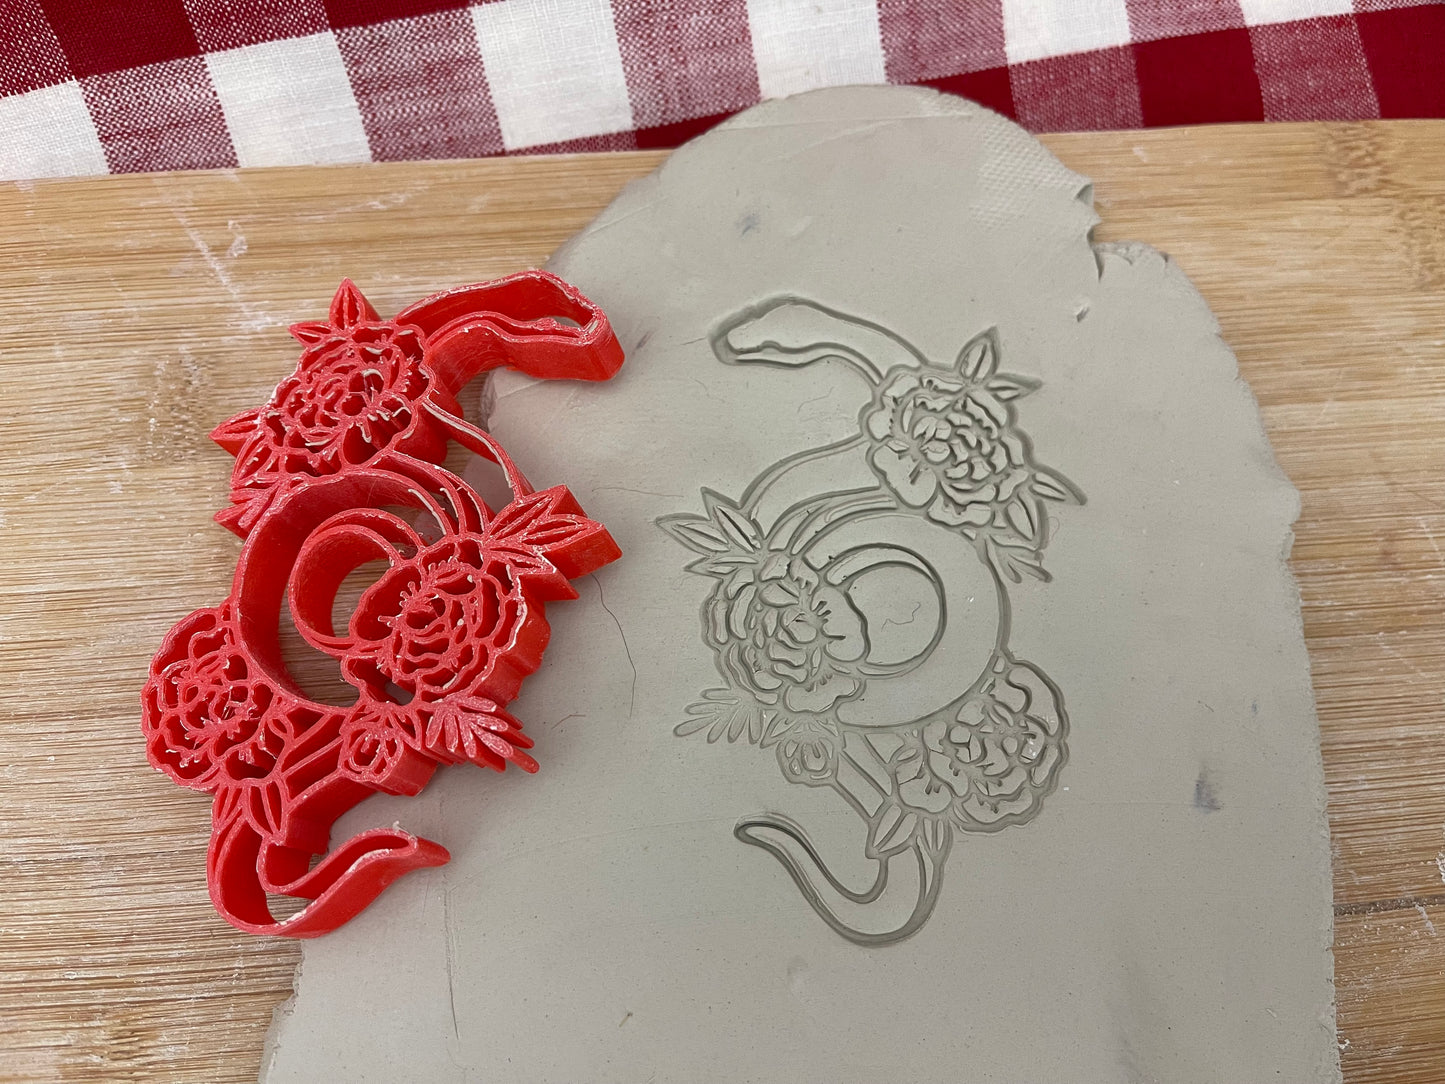 Snake with flowers stamp - plastic 3D printed, multiple sizes